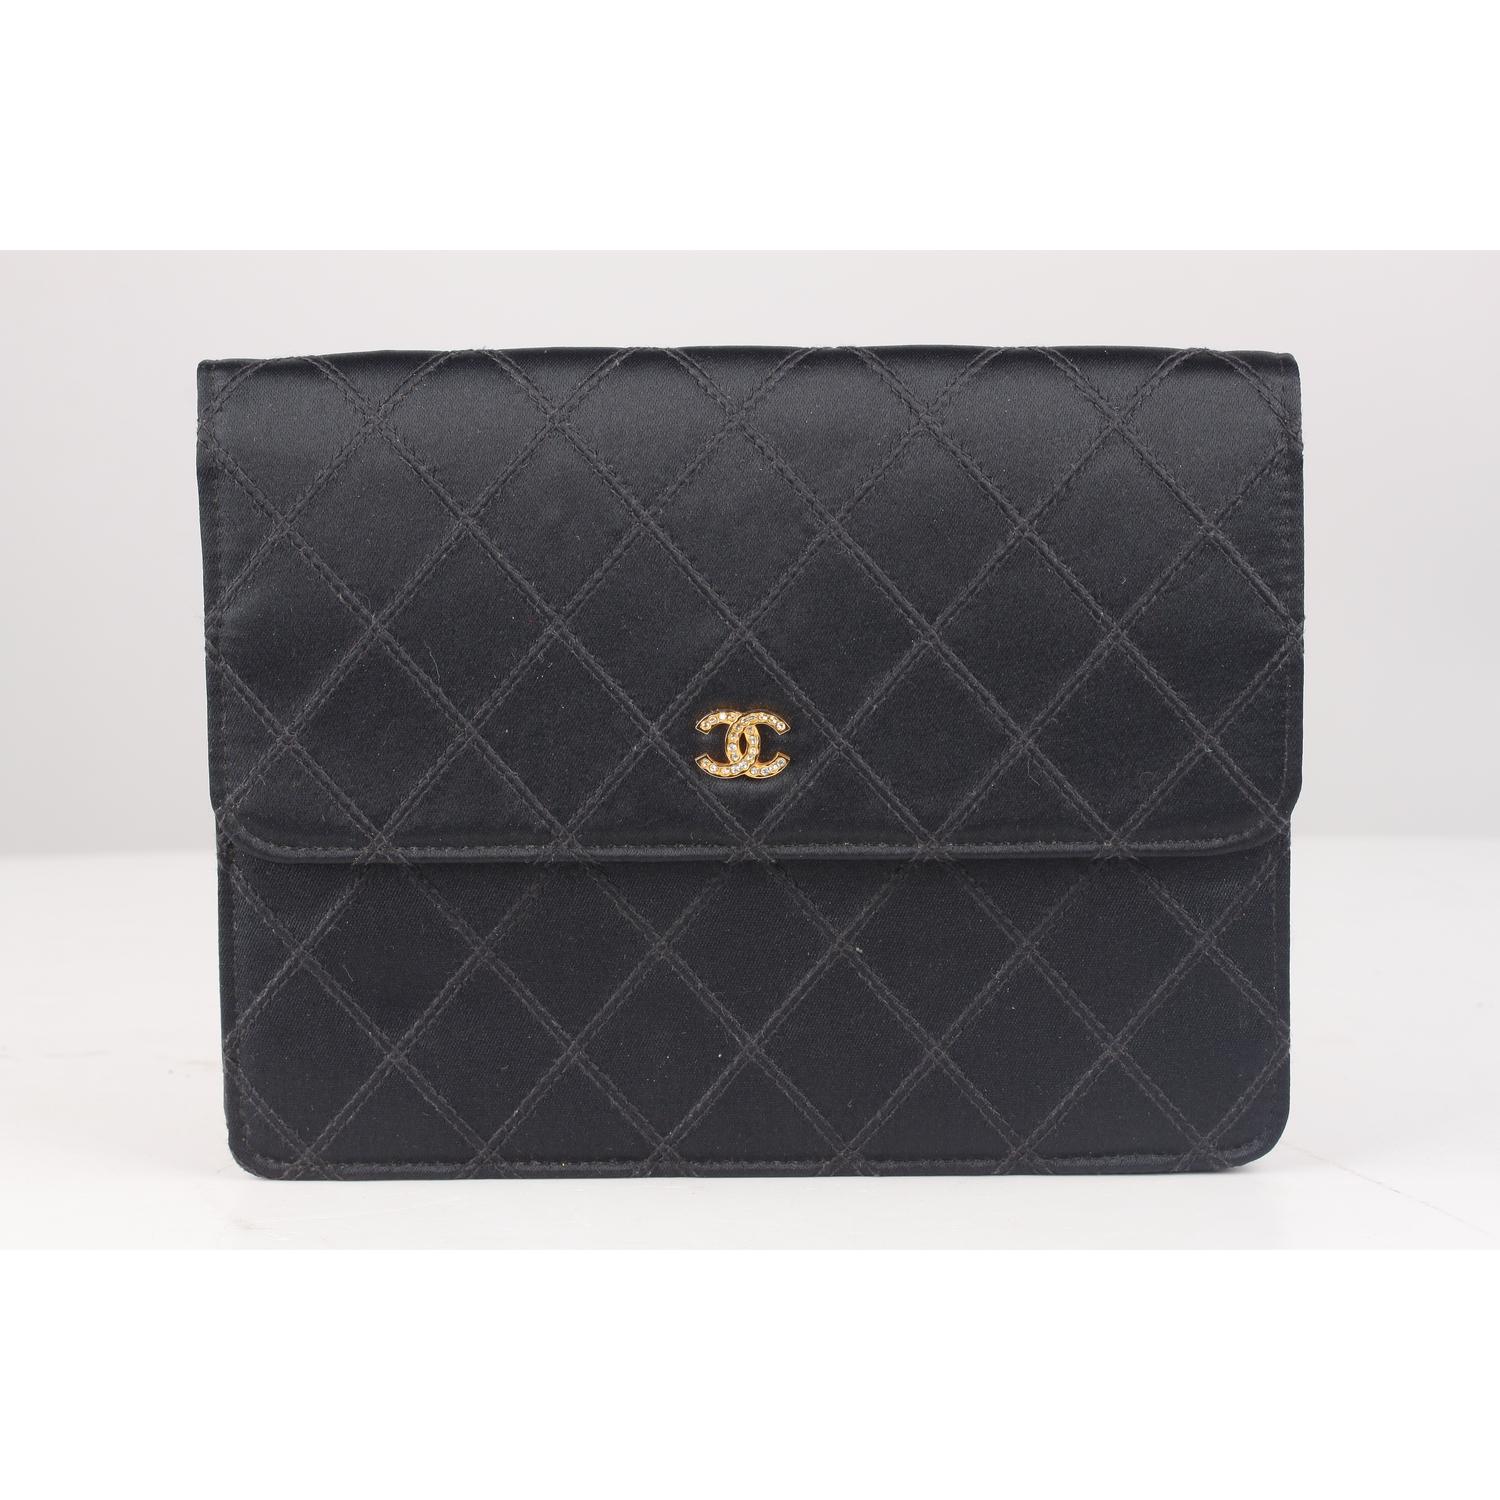 Vintage Chanel black quilted satin small clutch from the late 80s - early 90s. Flap with button closure. Gold metal CC - CHANEL logo on the front embellished with rhinestones. 1 open pocket on the back. Leather and gros-grain lining interior. 1 side